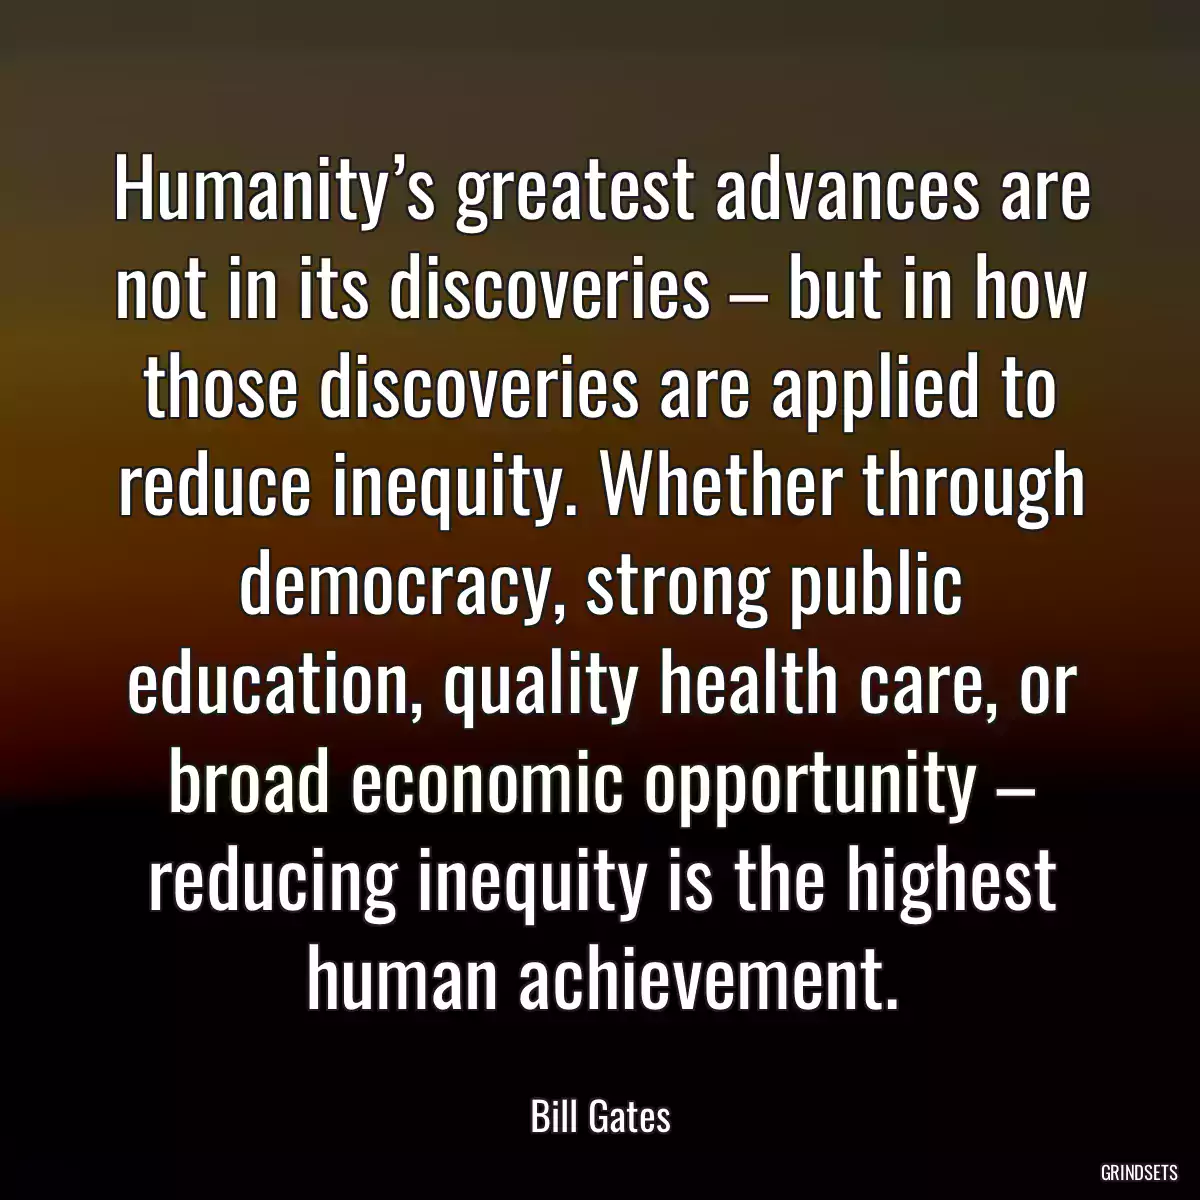 Humanity’s greatest advances are not in its discoveries – but in how those discoveries are applied to reduce inequity. Whether through democracy, strong public education, quality health care, or broad economic opportunity – reducing inequity is the highest human achievement.